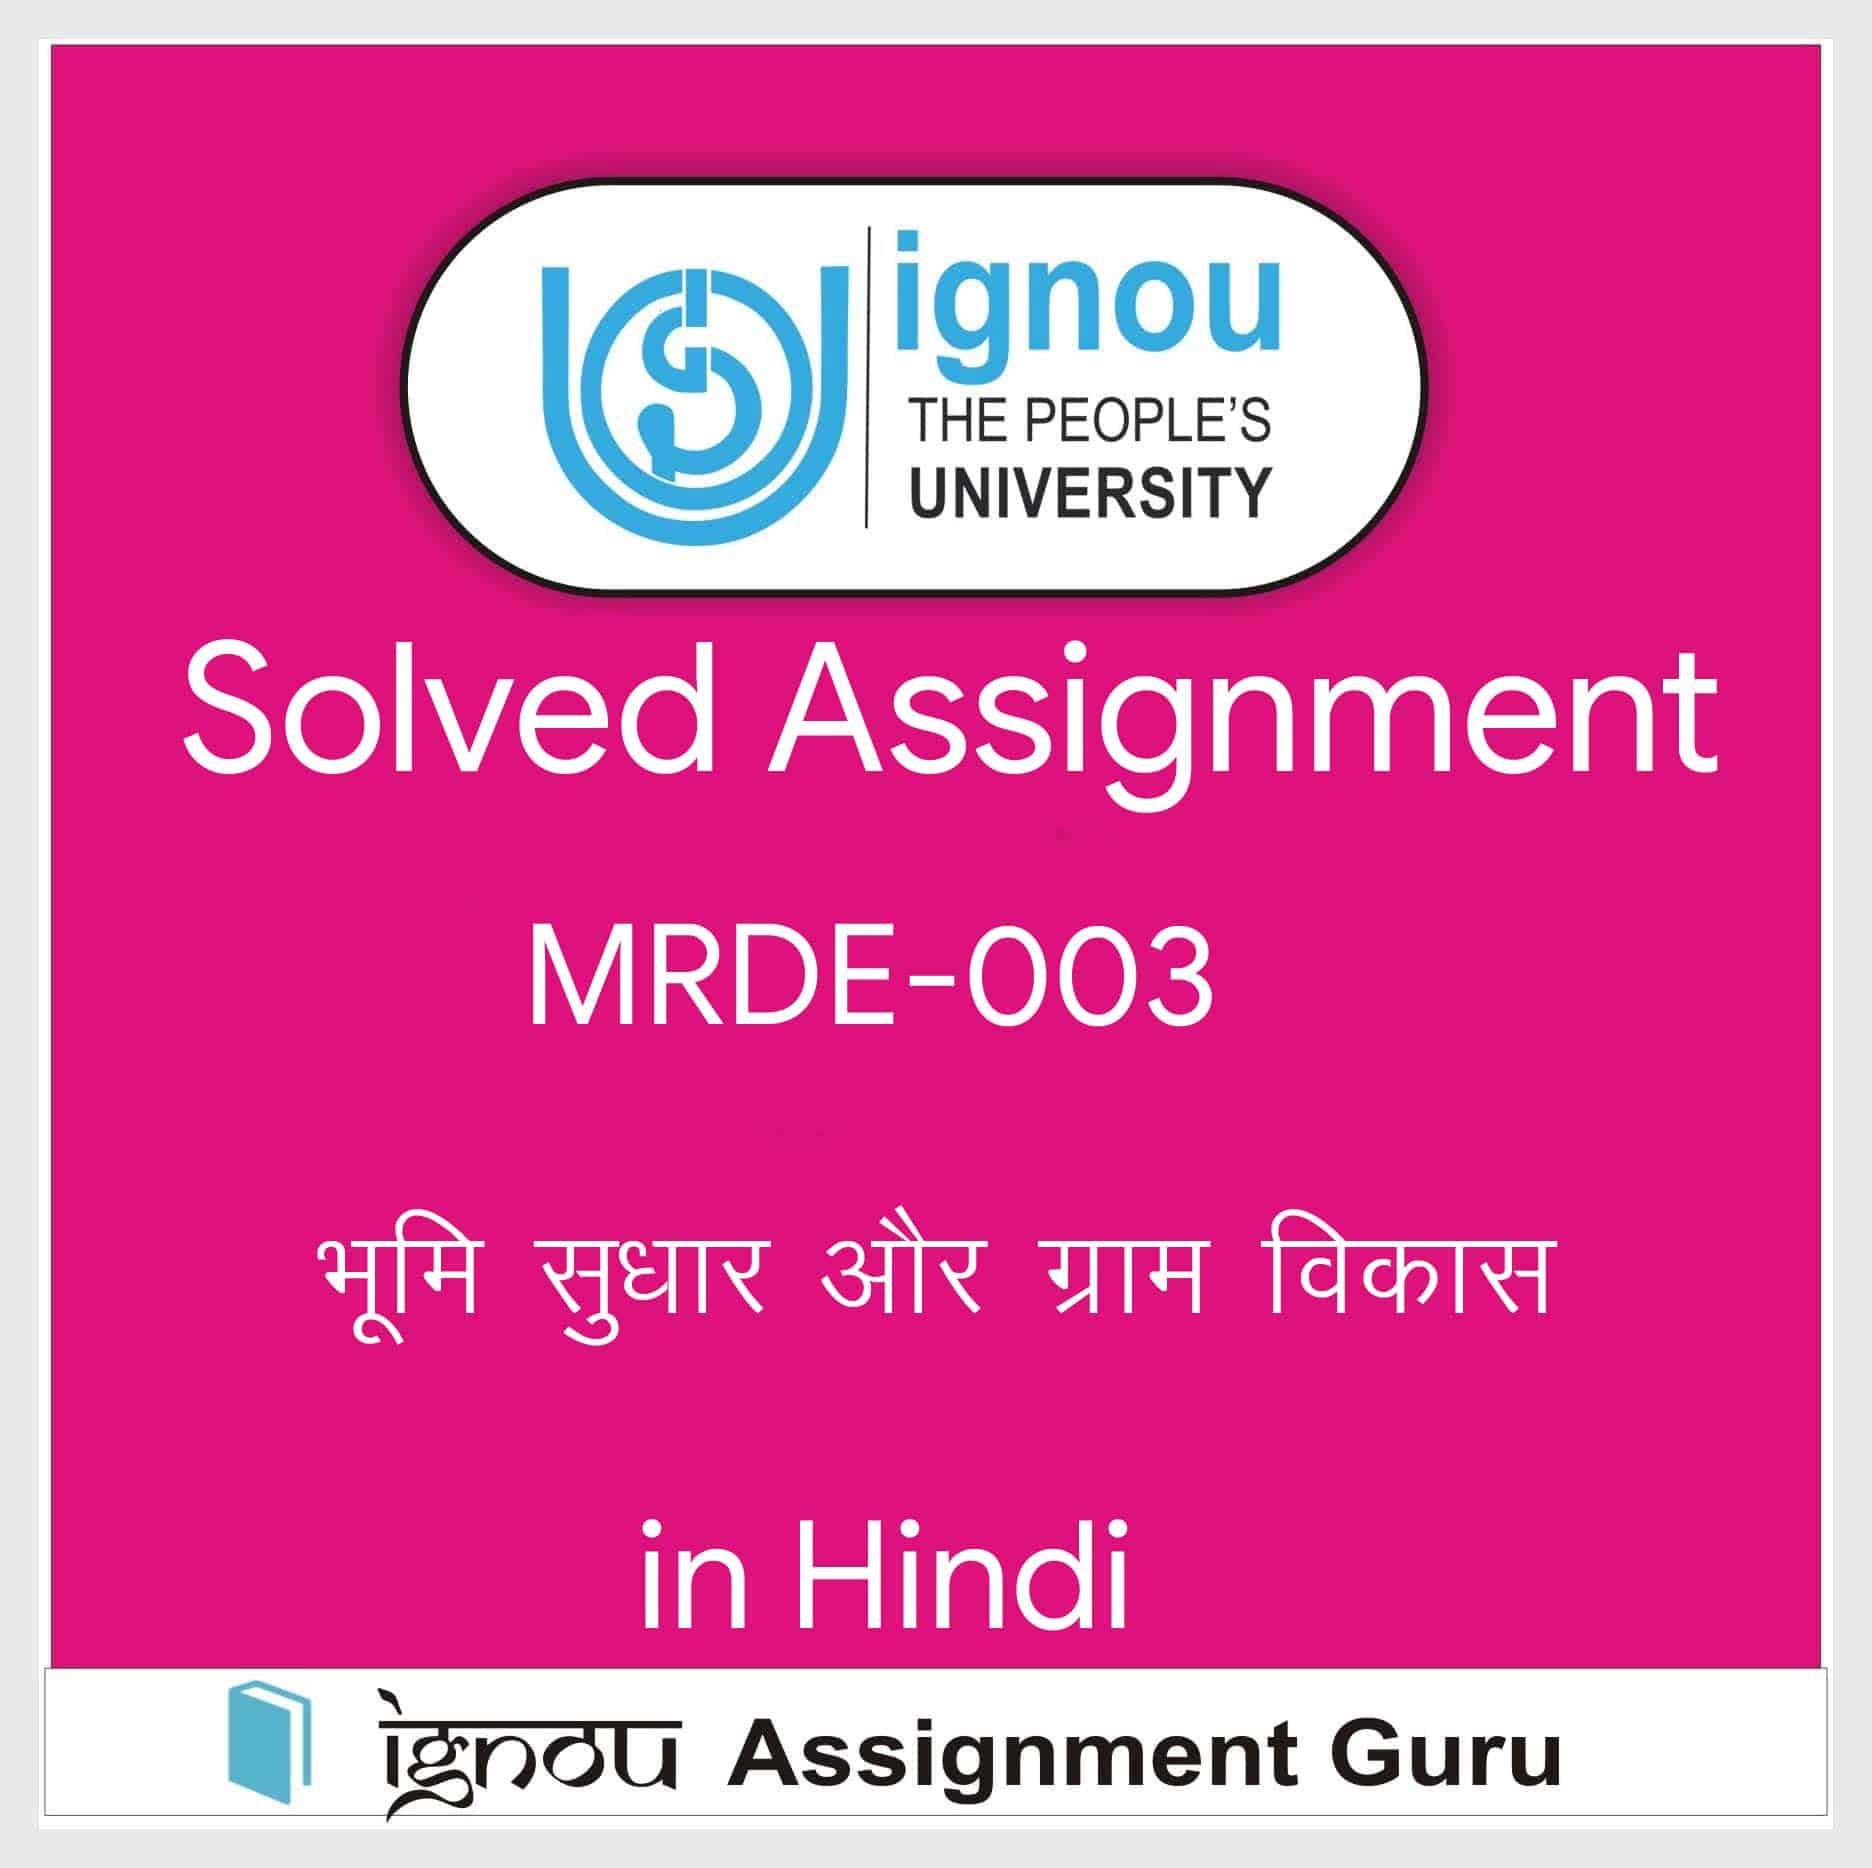 mso 003 solved assignment in hindi